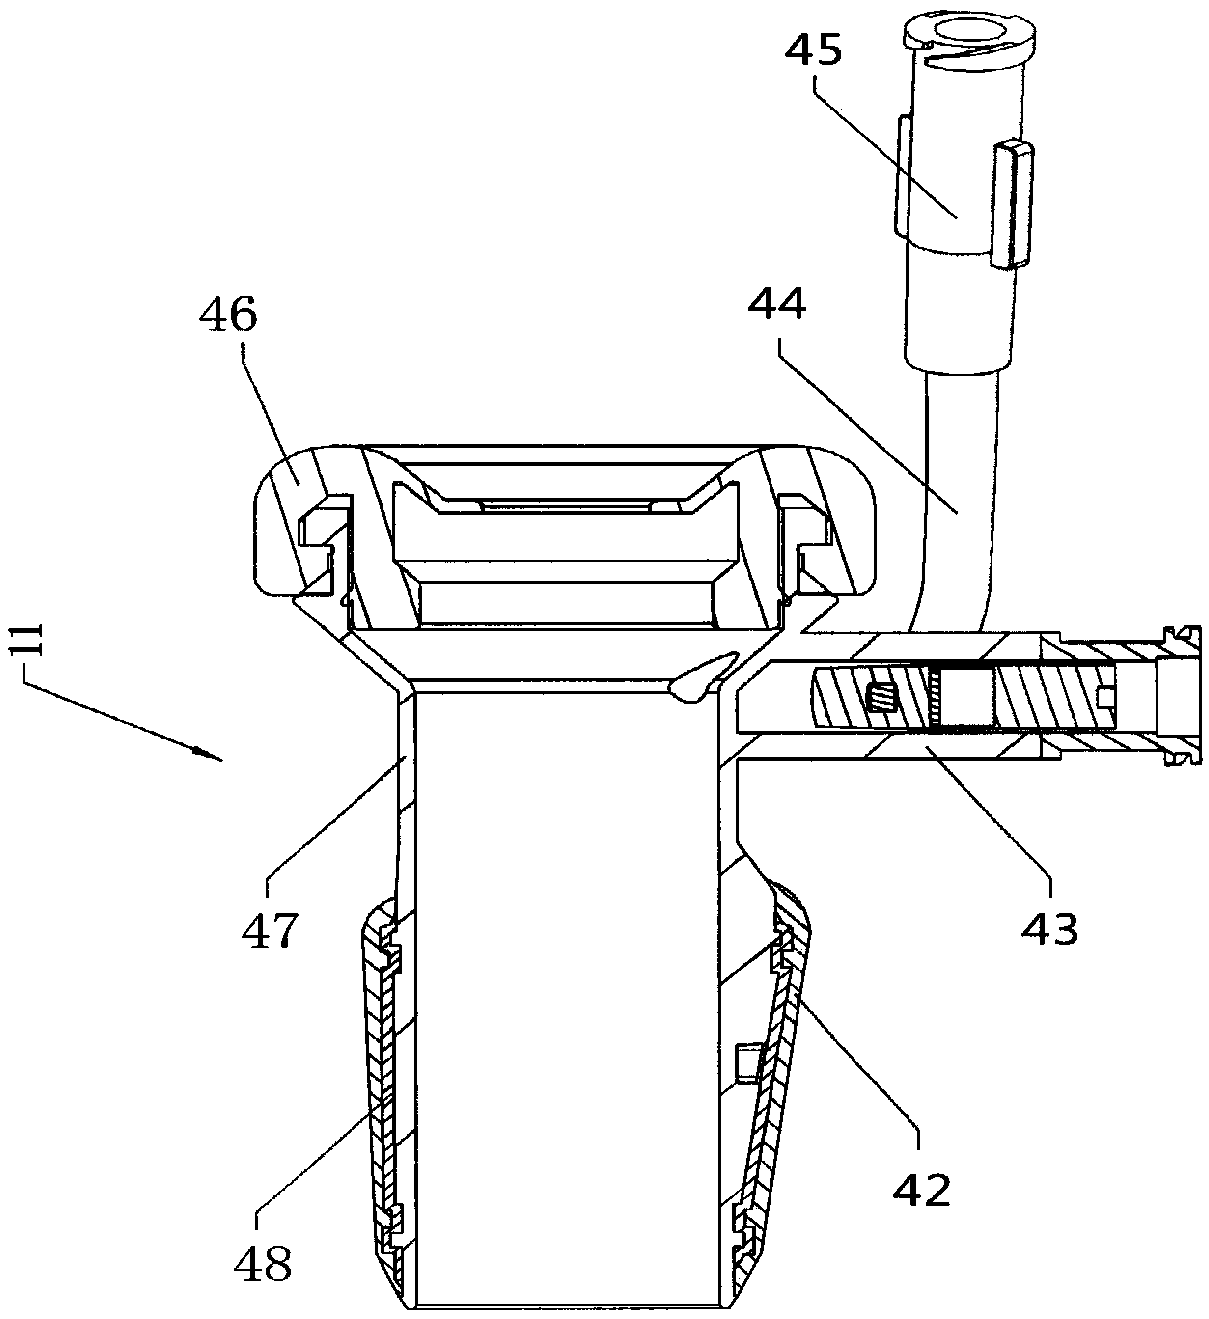 A low-temperature endoscope blood vessel collection device and method